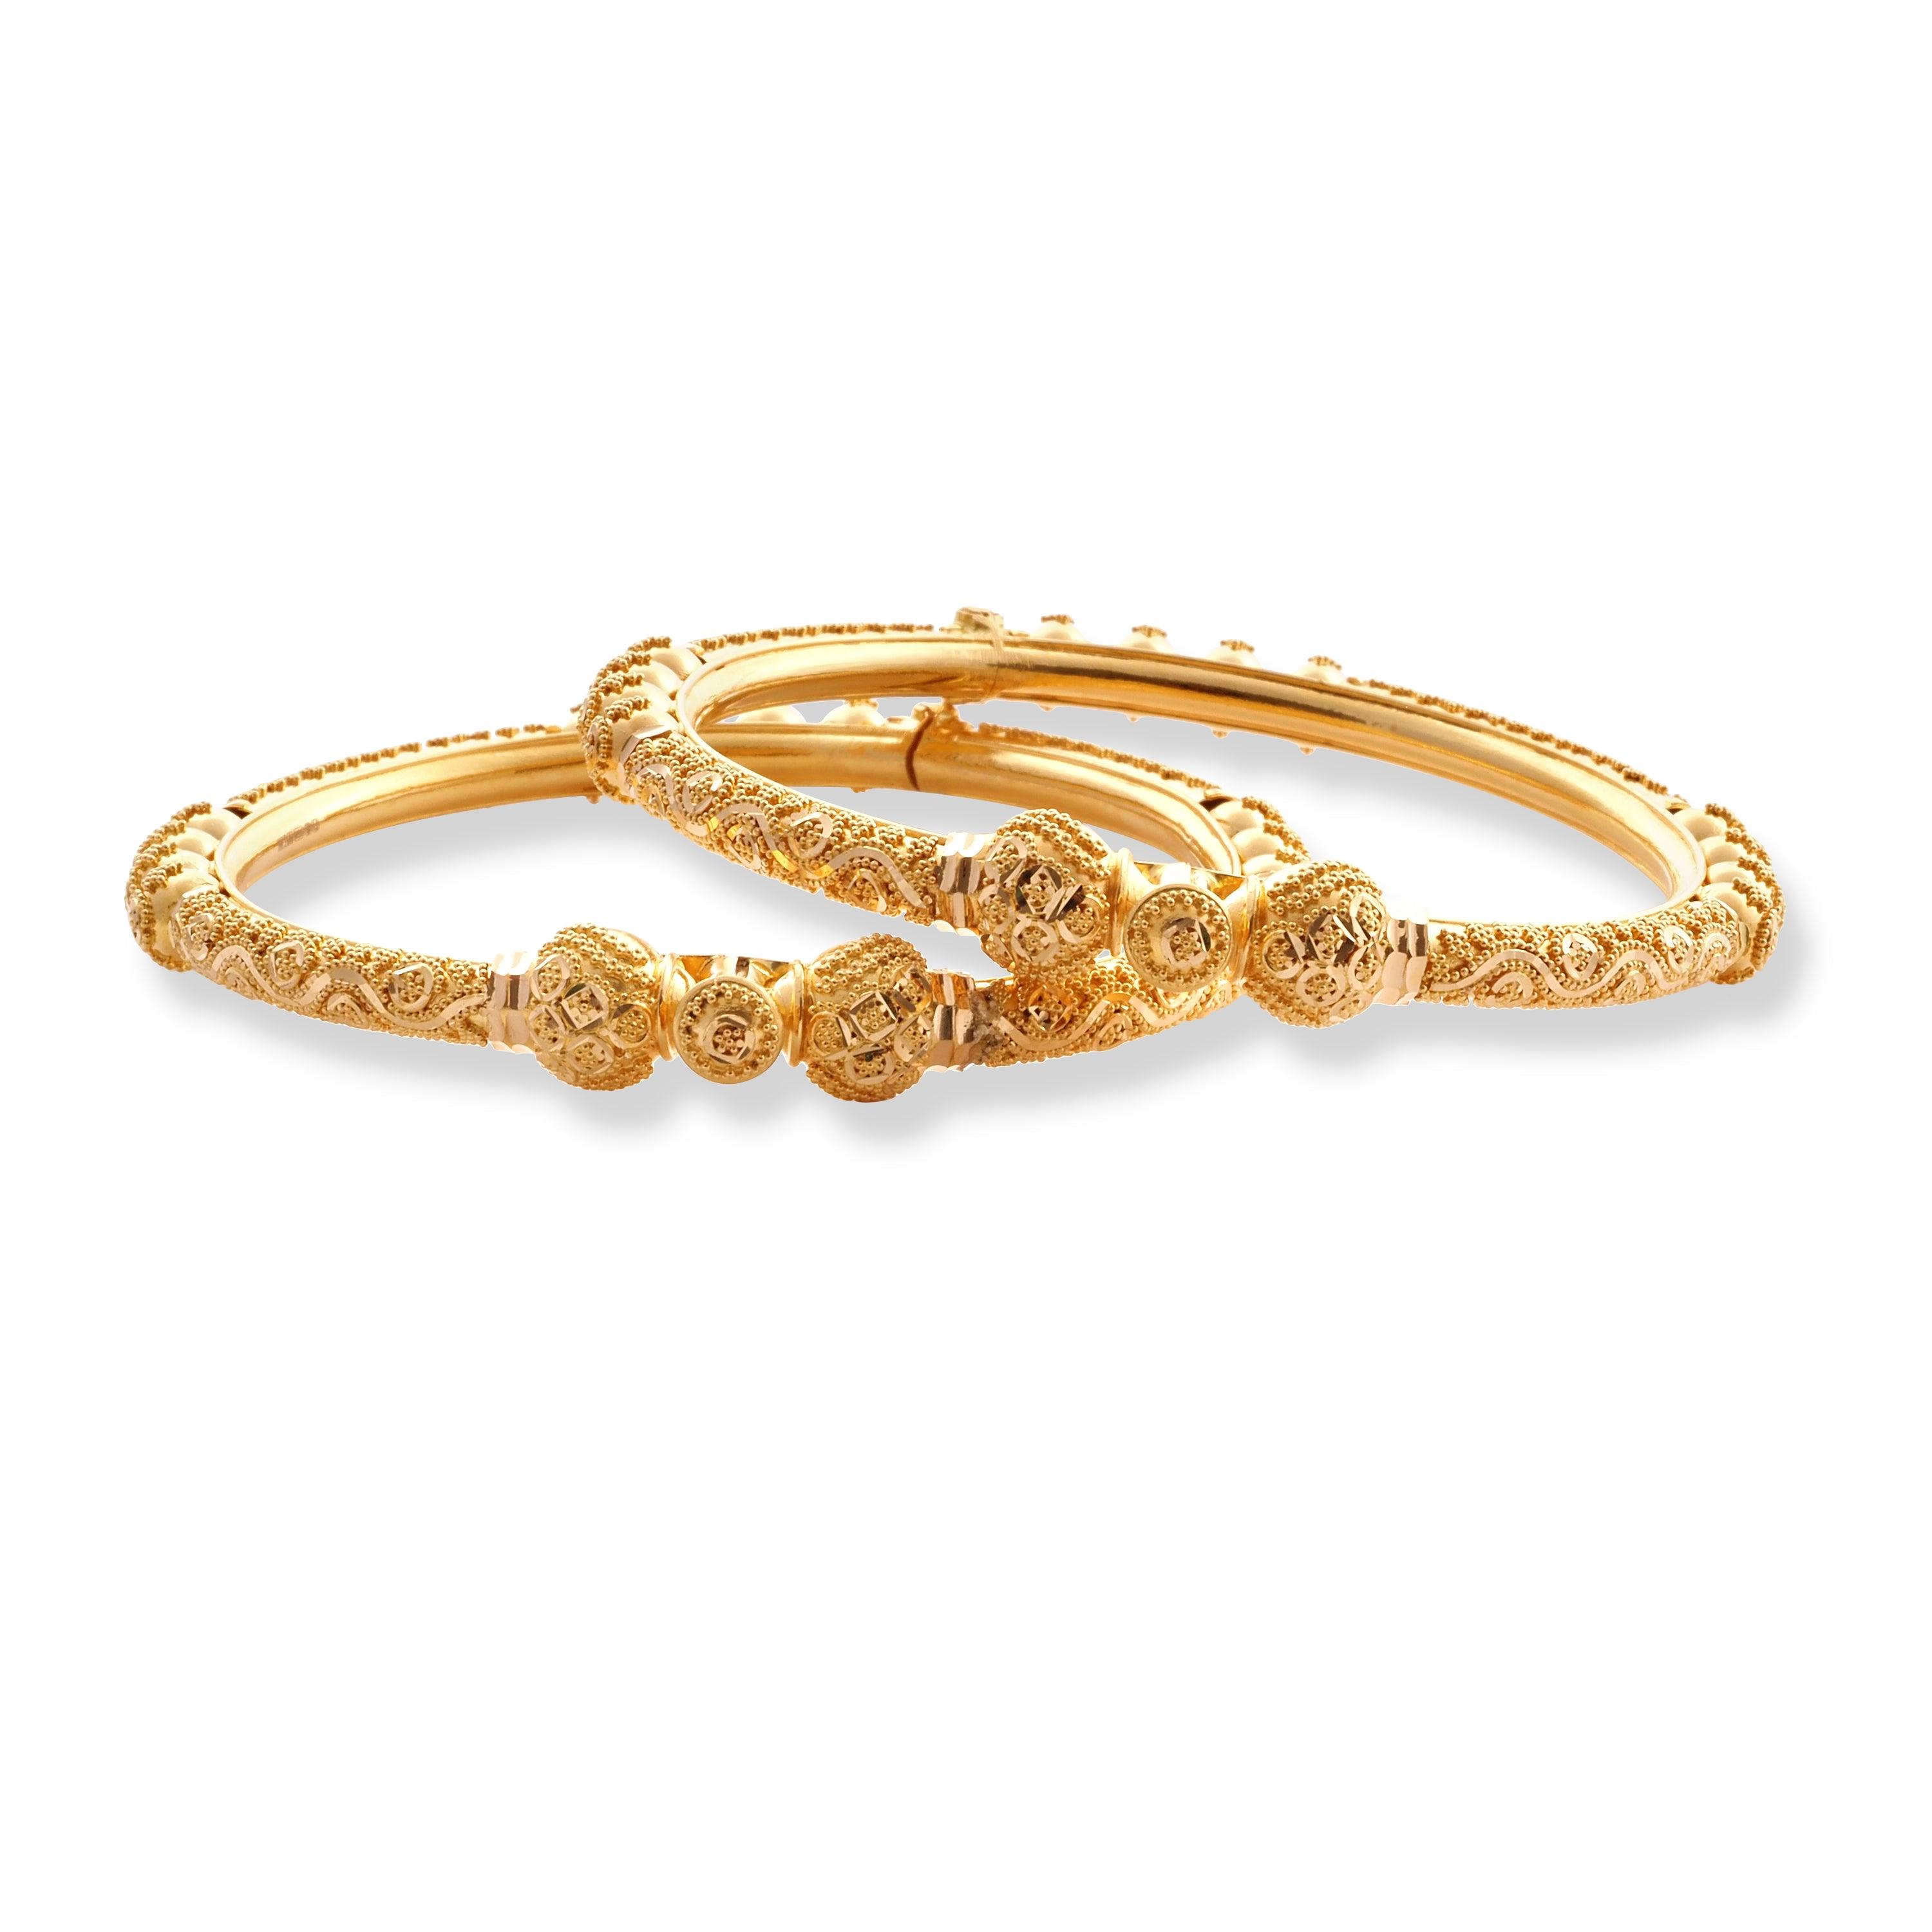 22ct Yellow Gold Set of Two Bangles in Hinge & Openable Screw Fitting B-8588 - Minar Jewellers